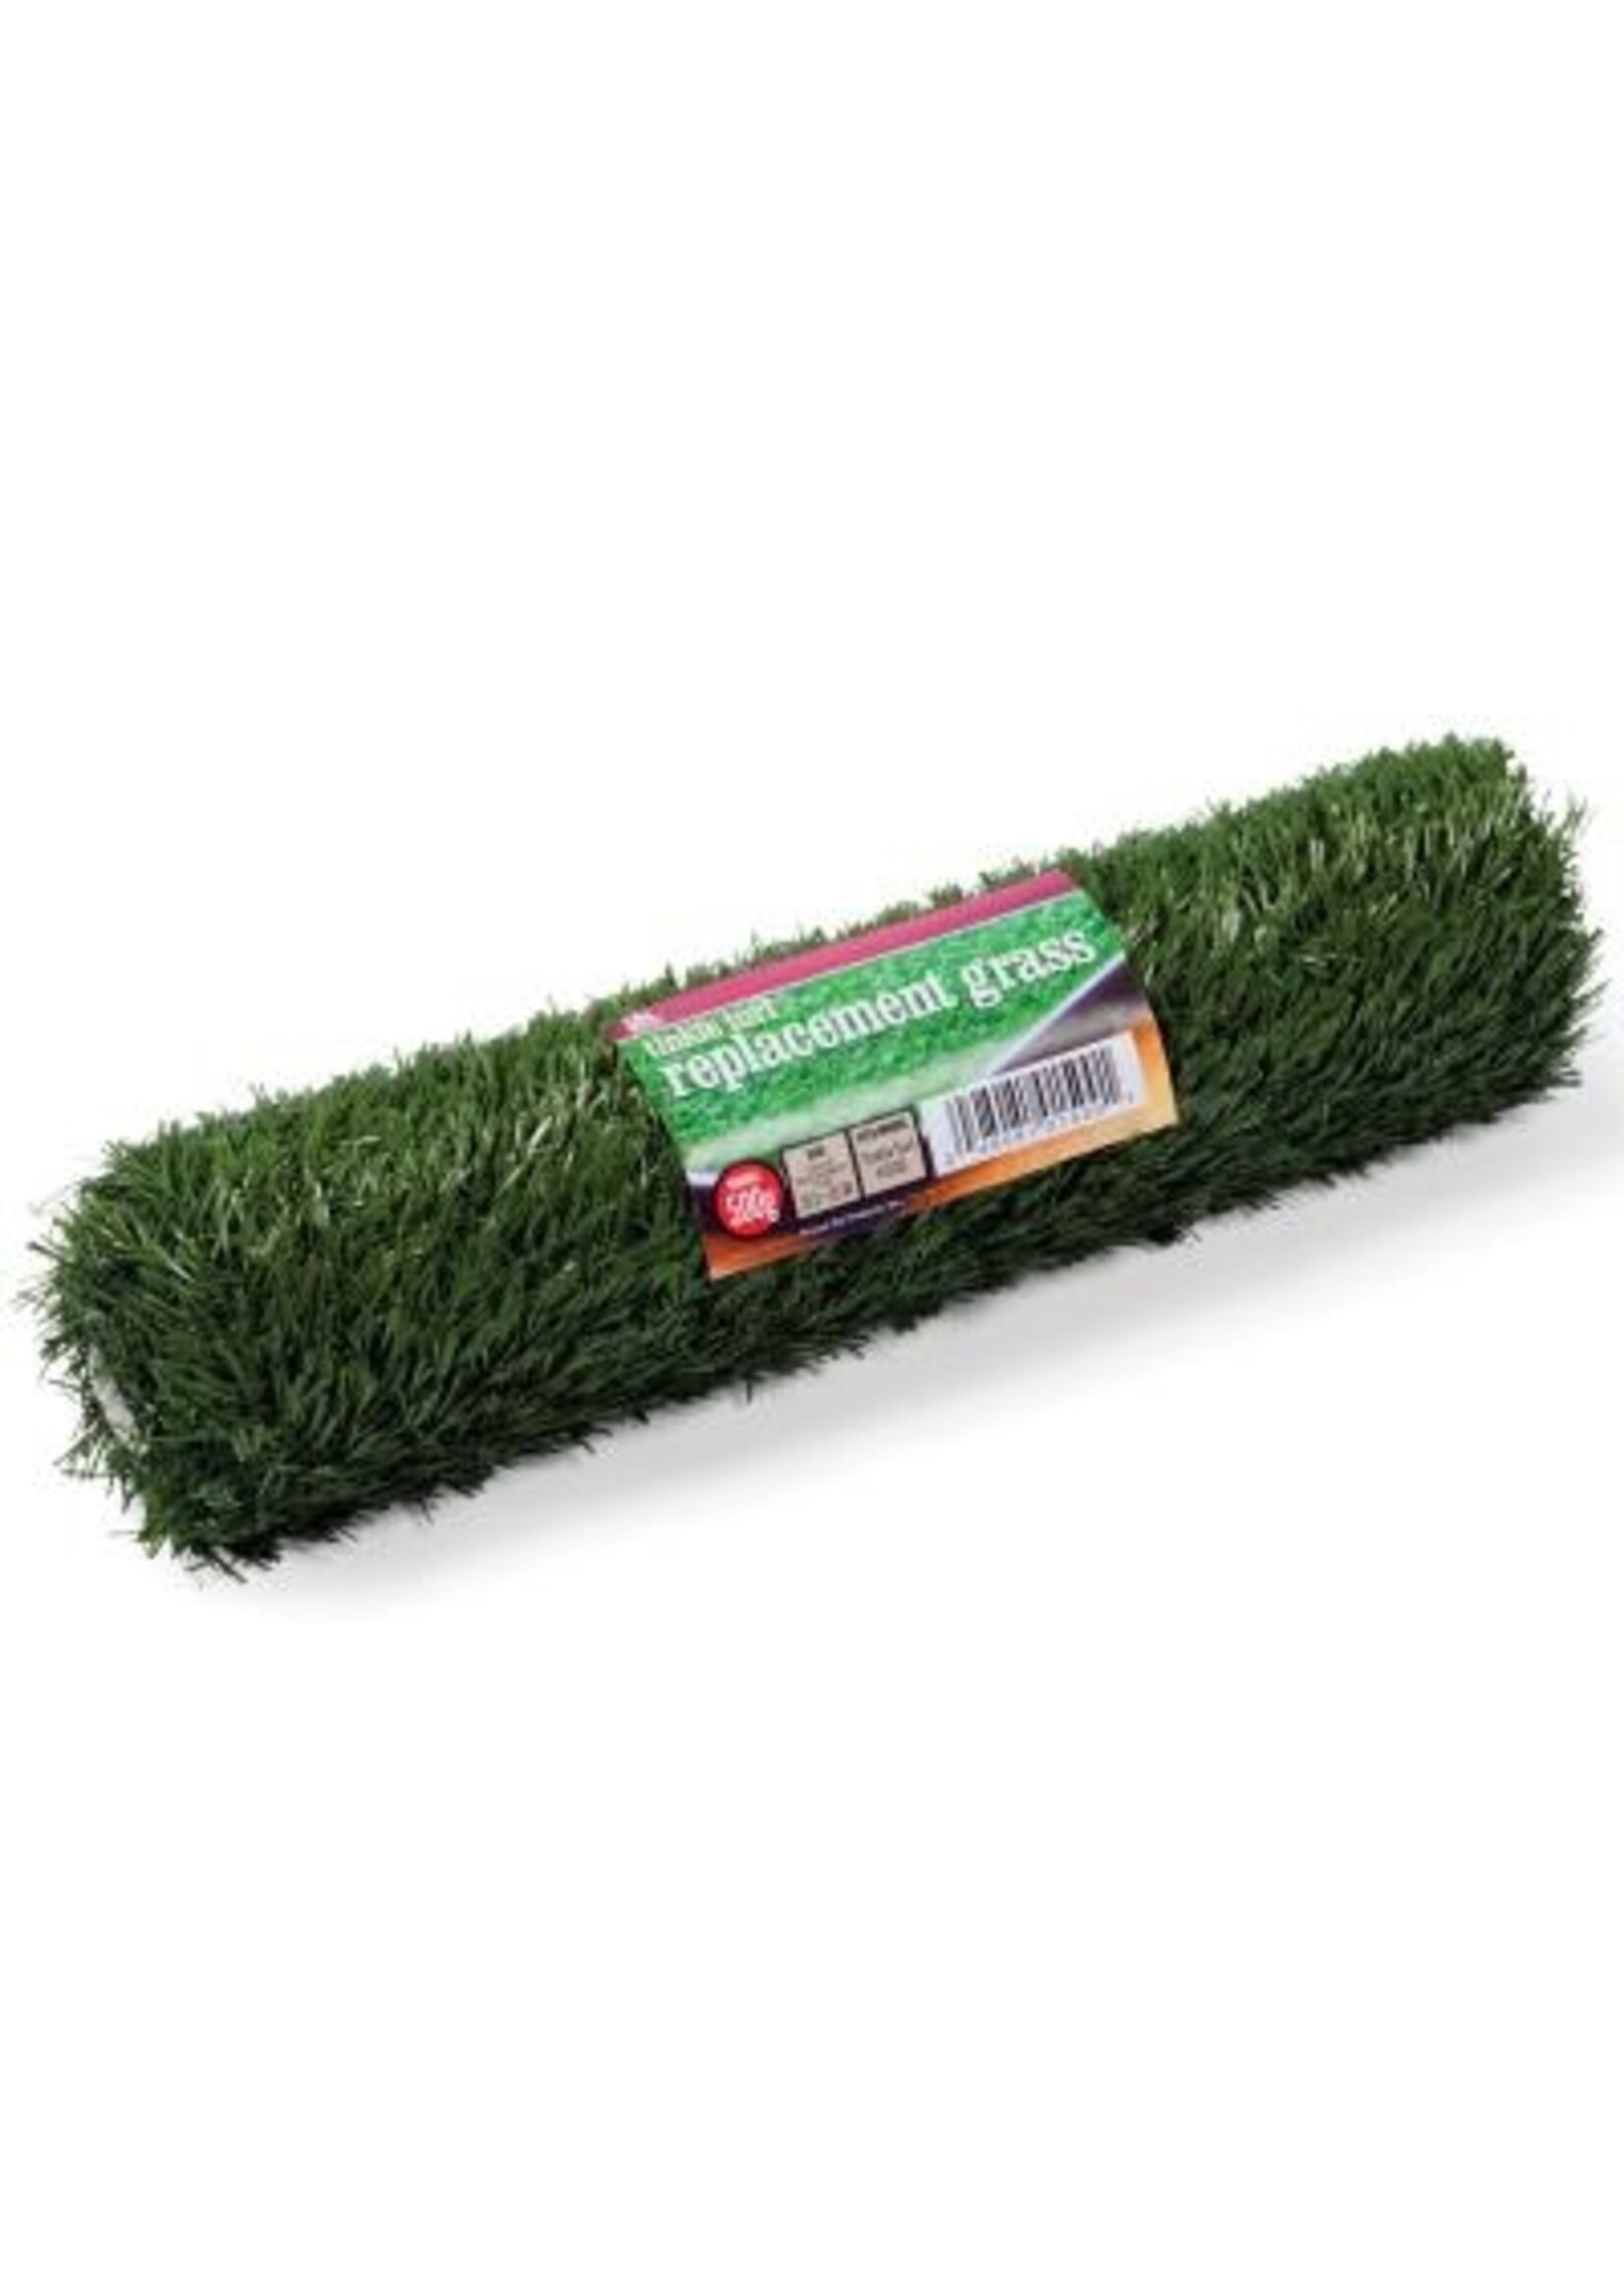 Prevue Hendryx Prevue Hendryx Tinkle Turf Replacement Grass